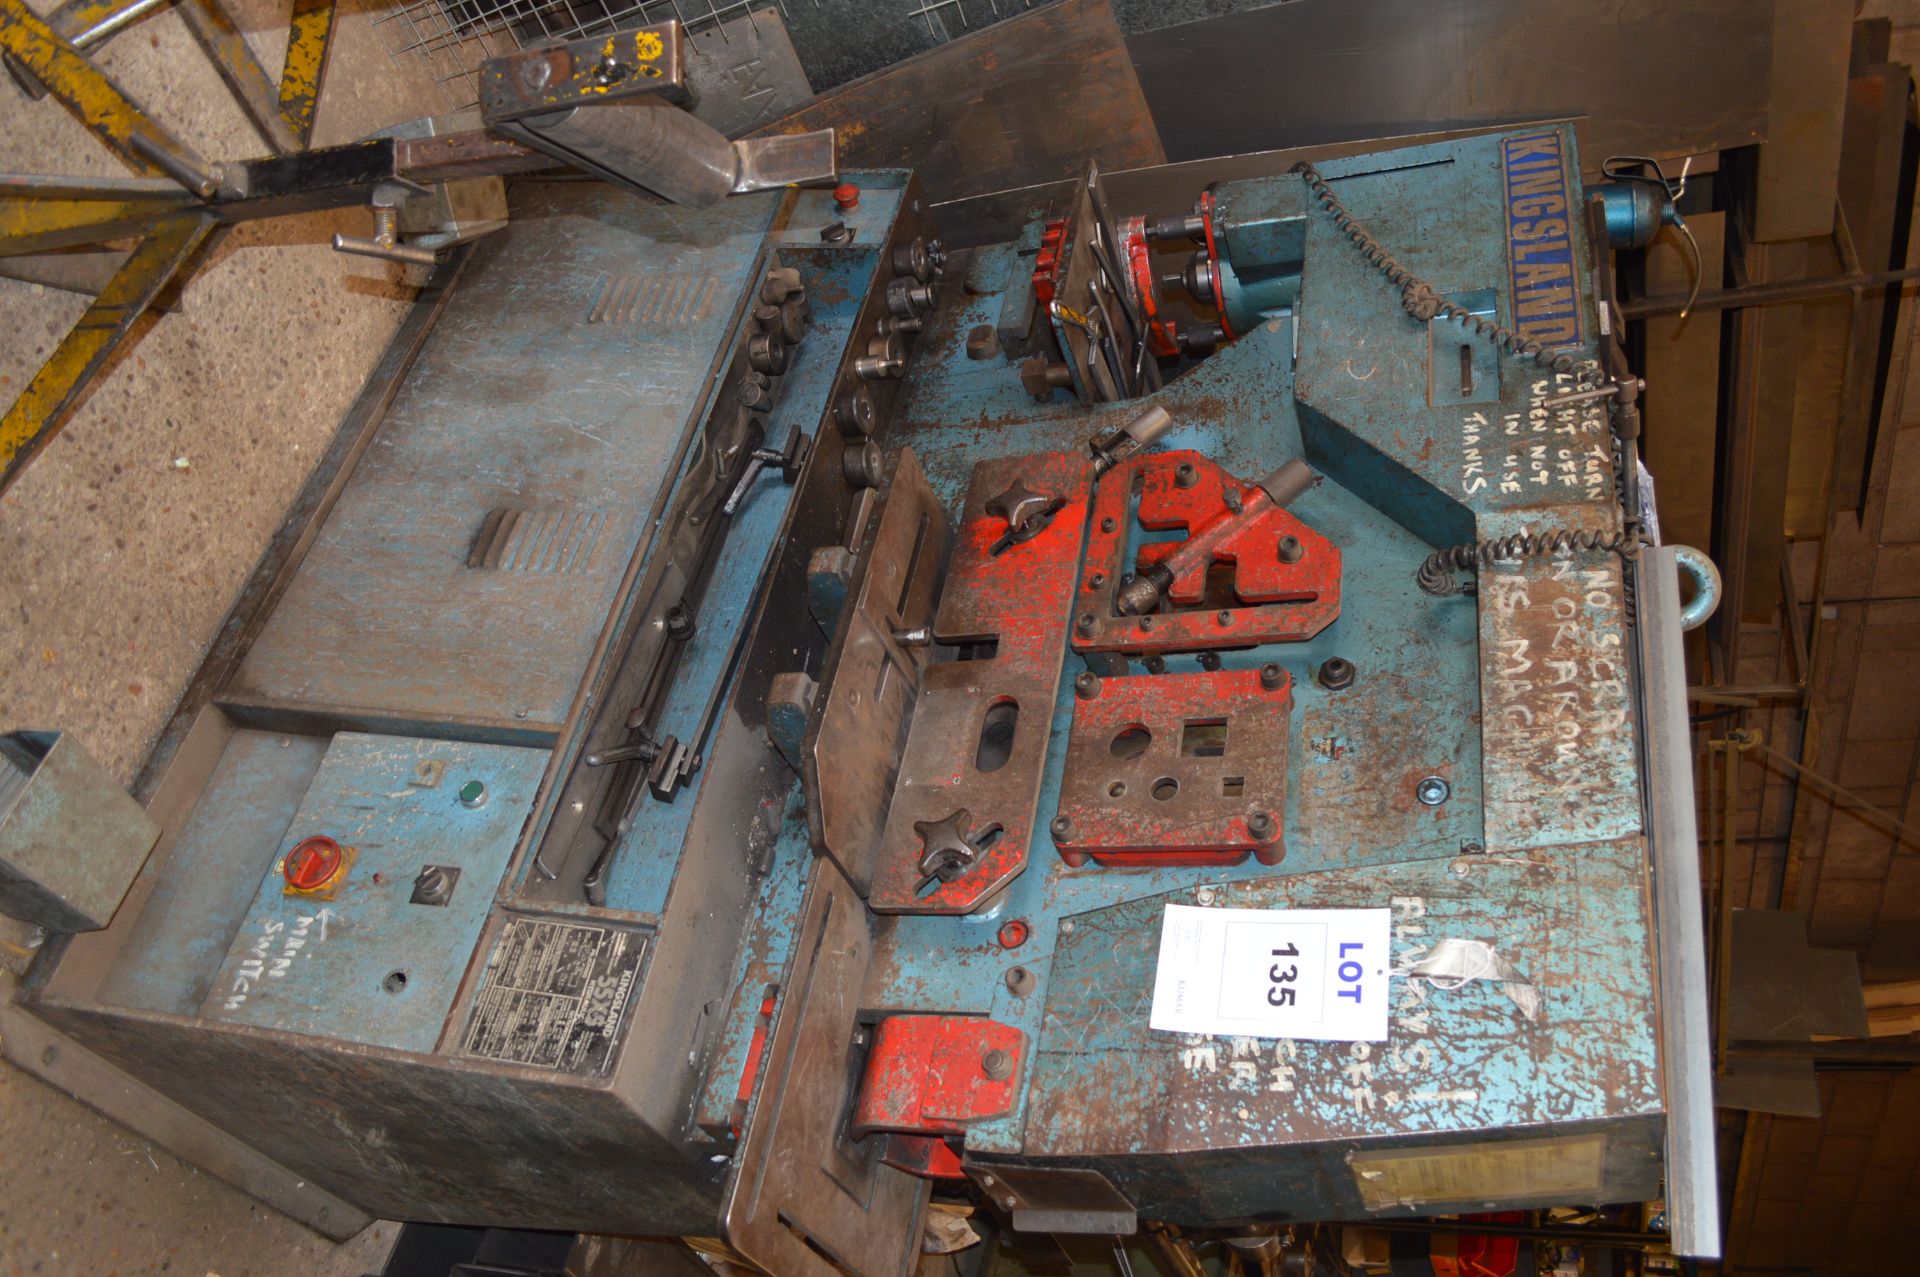 Kingsland 55 XS Metal Worker 
located at Spa Gates Ltd, Blick Road, Warwick CV34 6TA and can only be